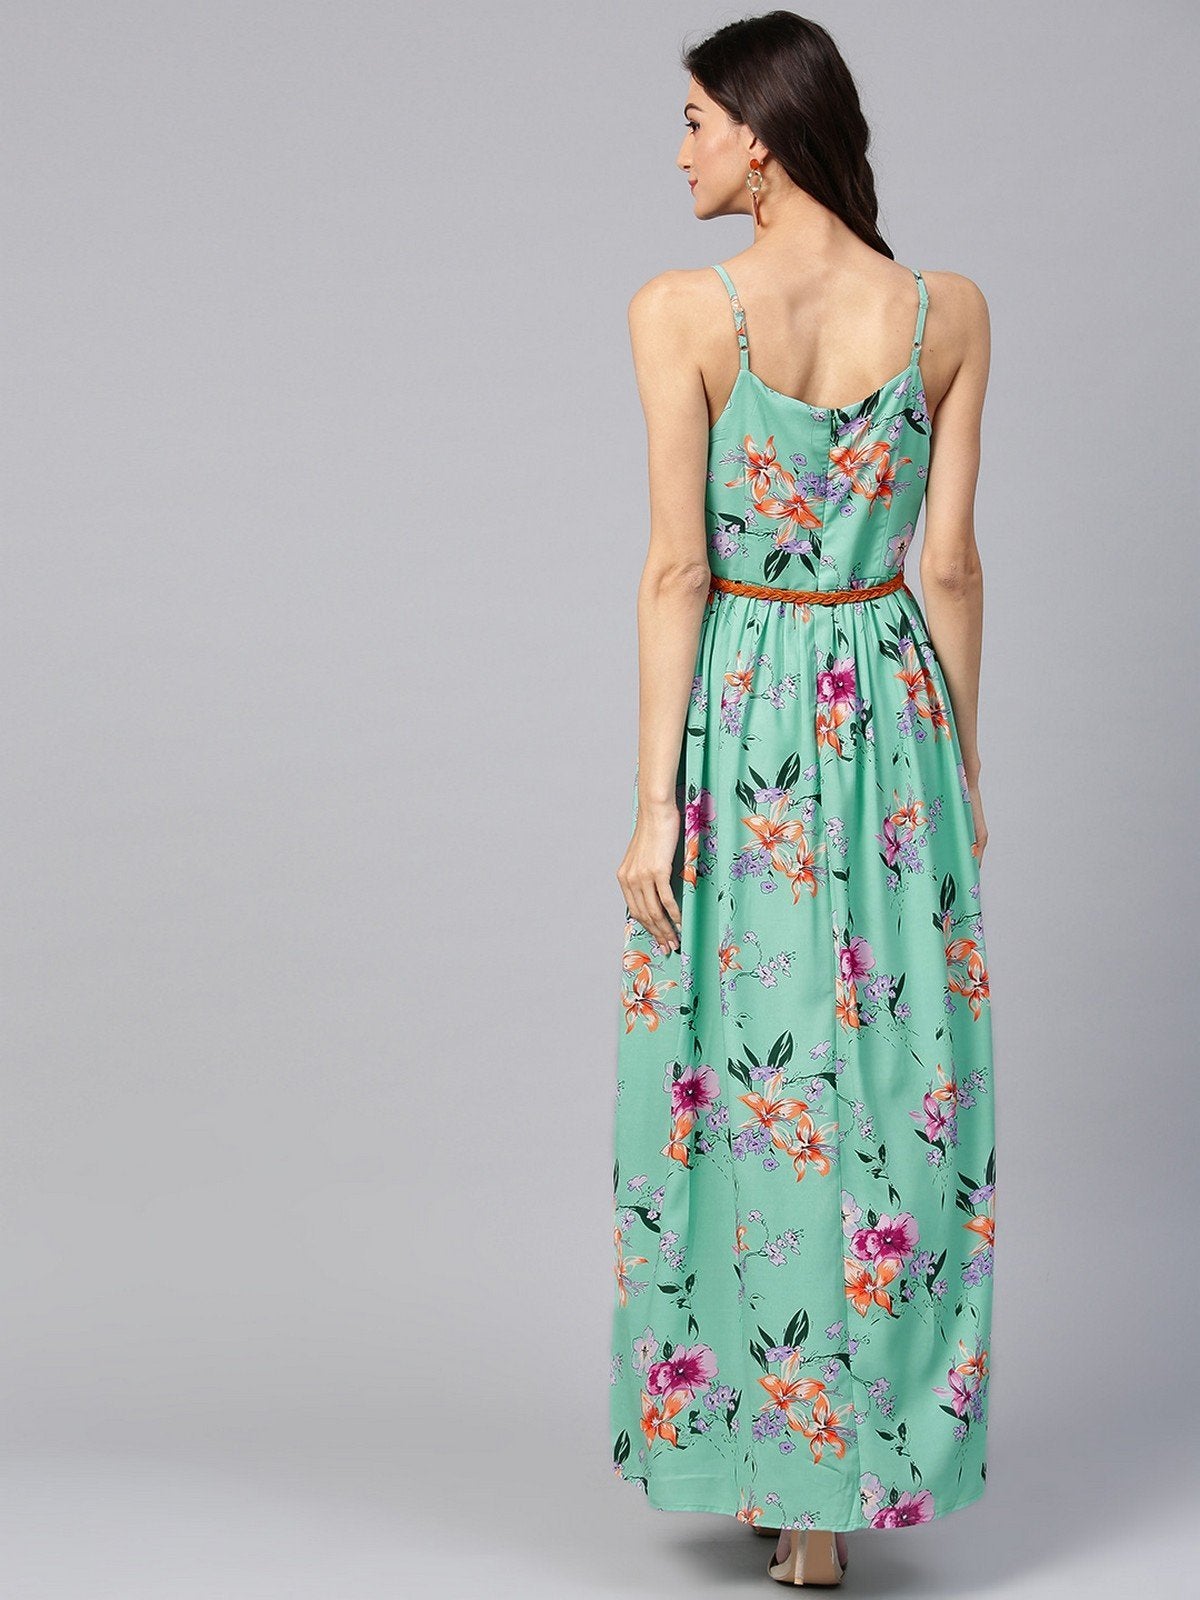 Women's Floral Strappy Maxi Dress - Pannkh